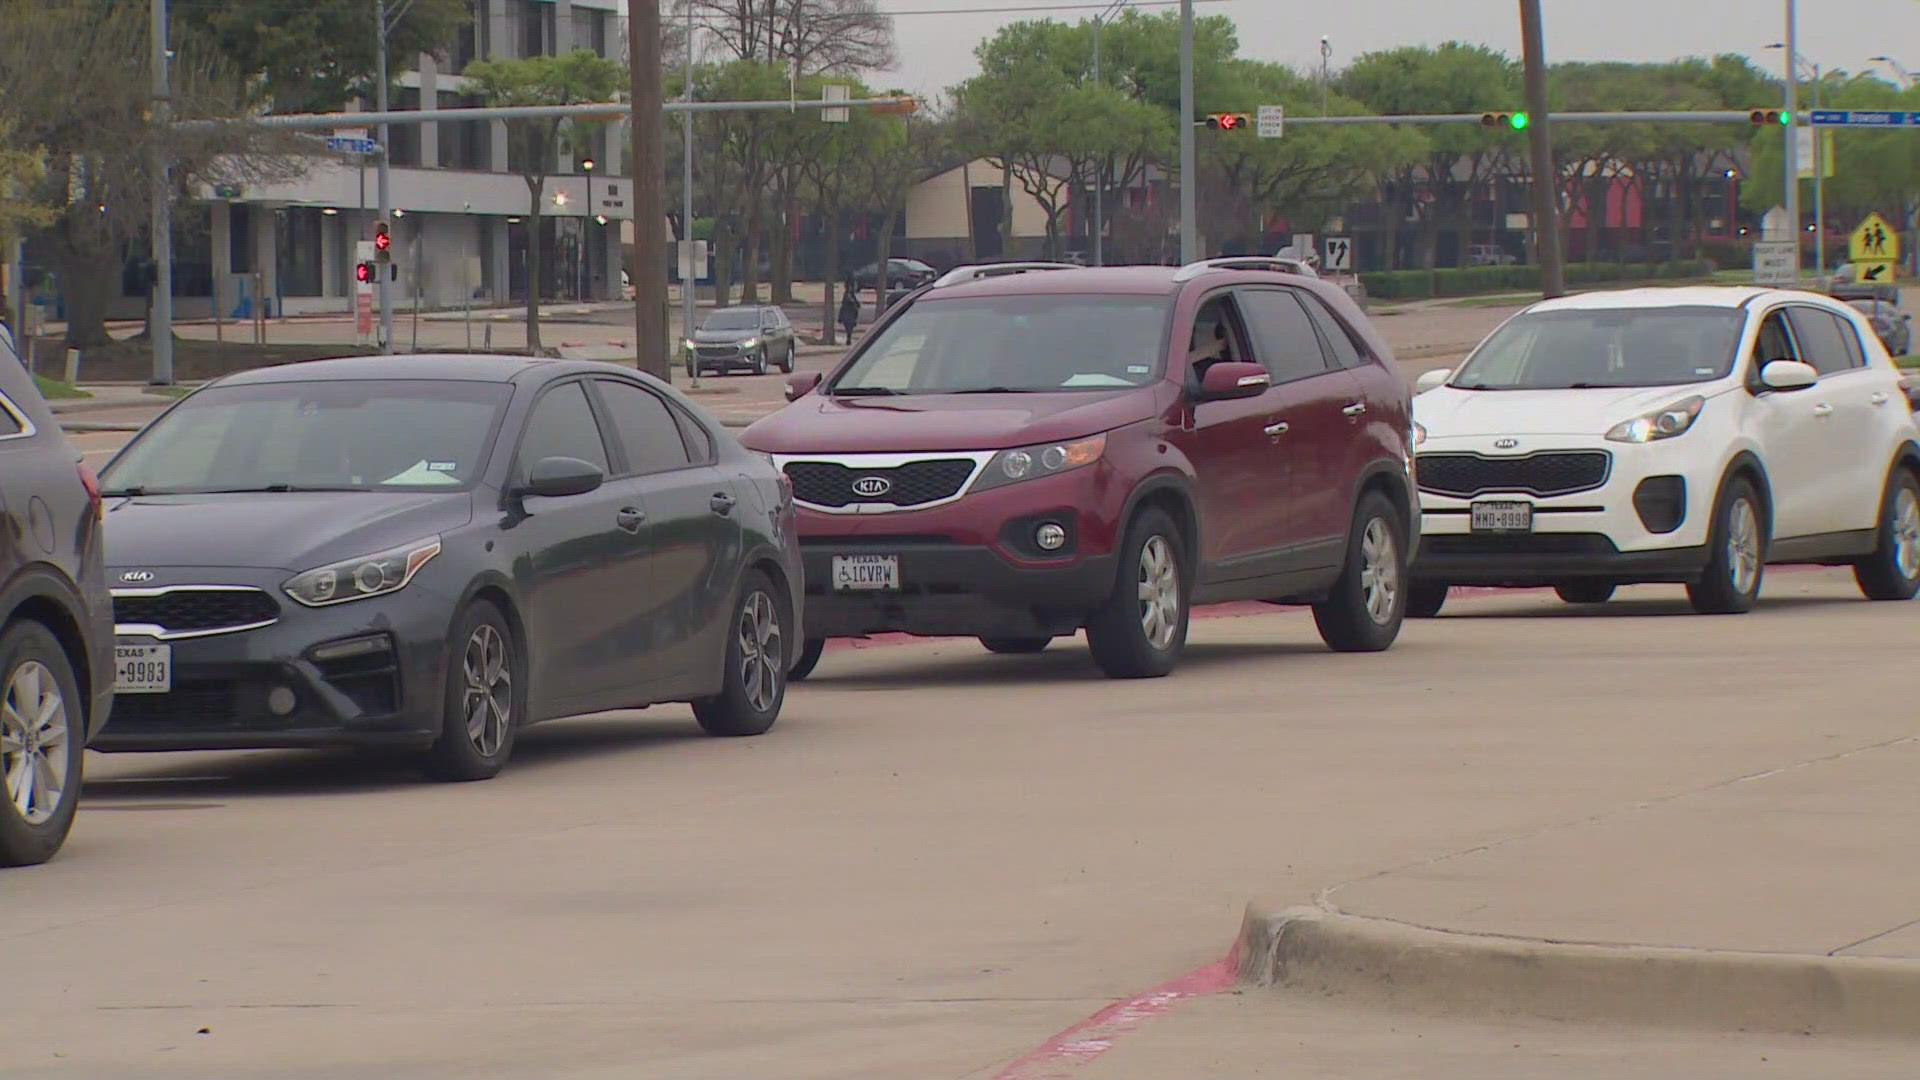 FWPD HELPING KIA OWNERS UPDATE AND PROTECT THEIR VEHICLE